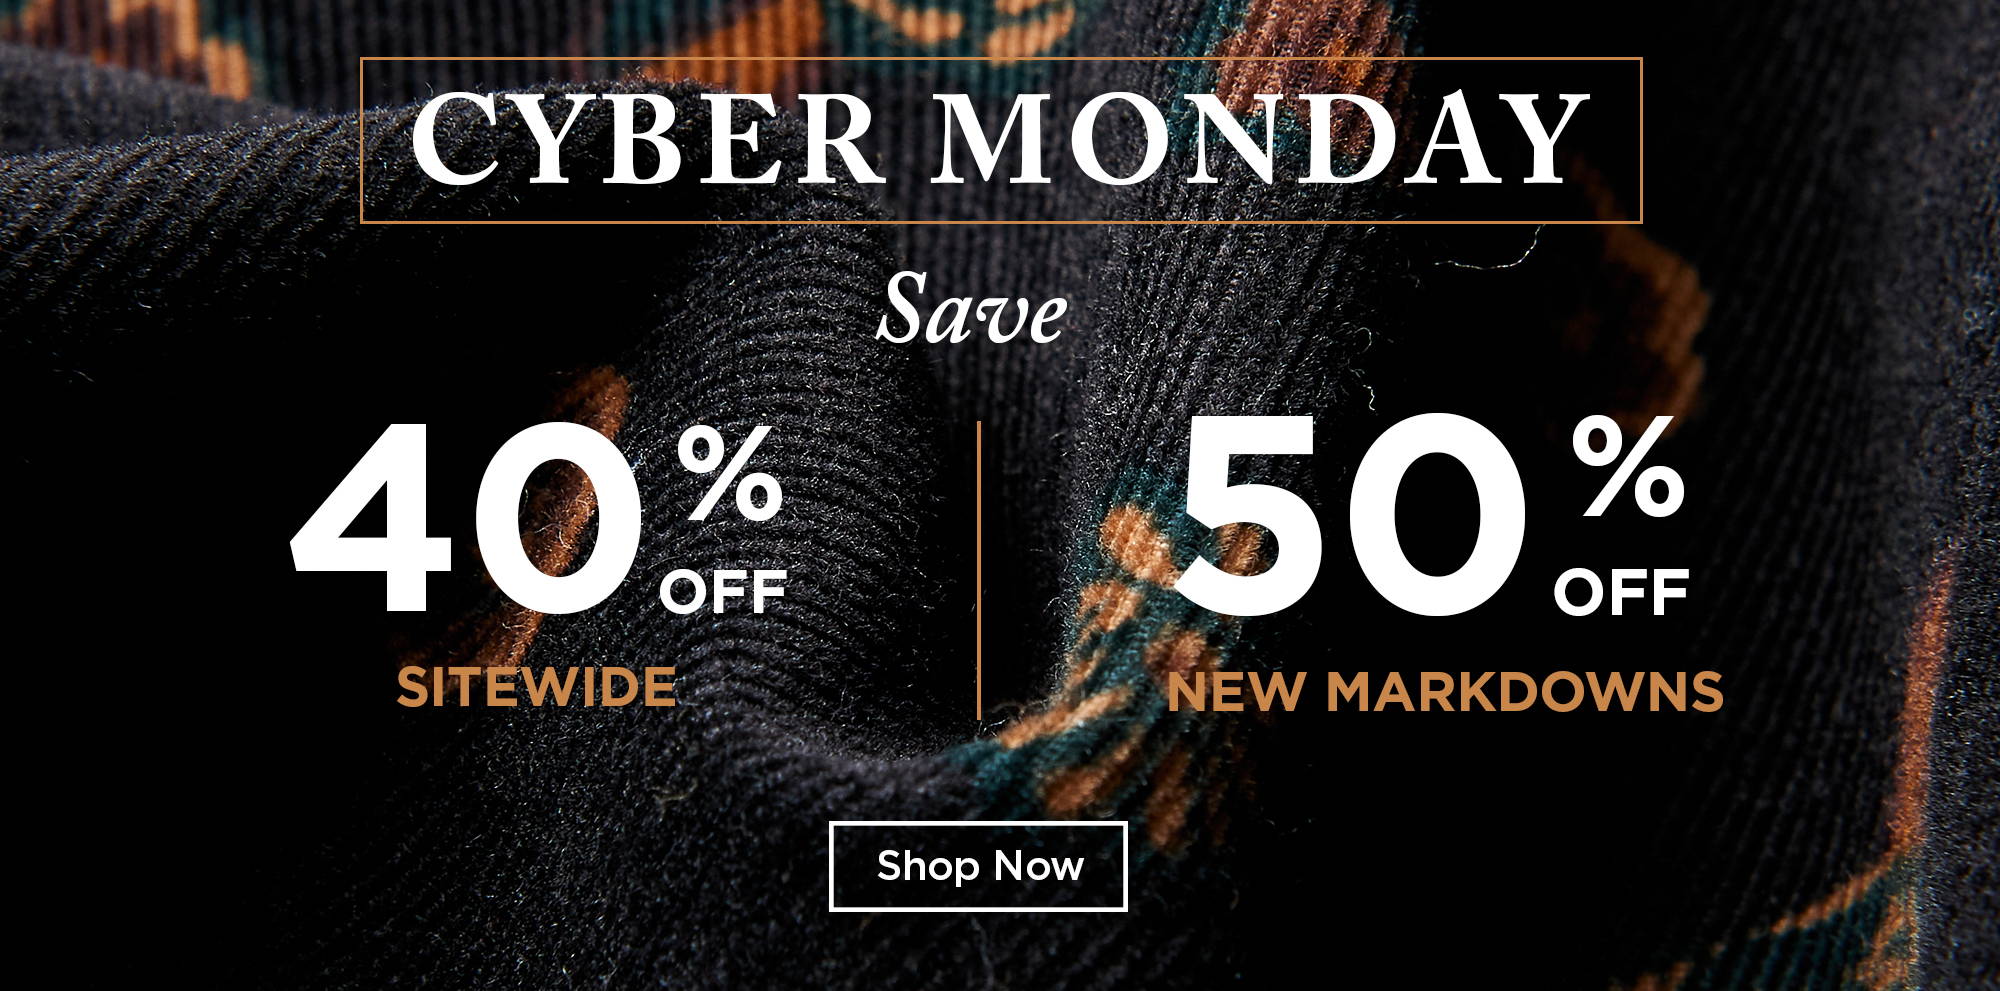 BLACK FRIDAY SALE! 40% OFF FULL-PRICE ITEMS SITEWIDE | PLUS EXTRA 50% OFF SALE. SHOP NOW